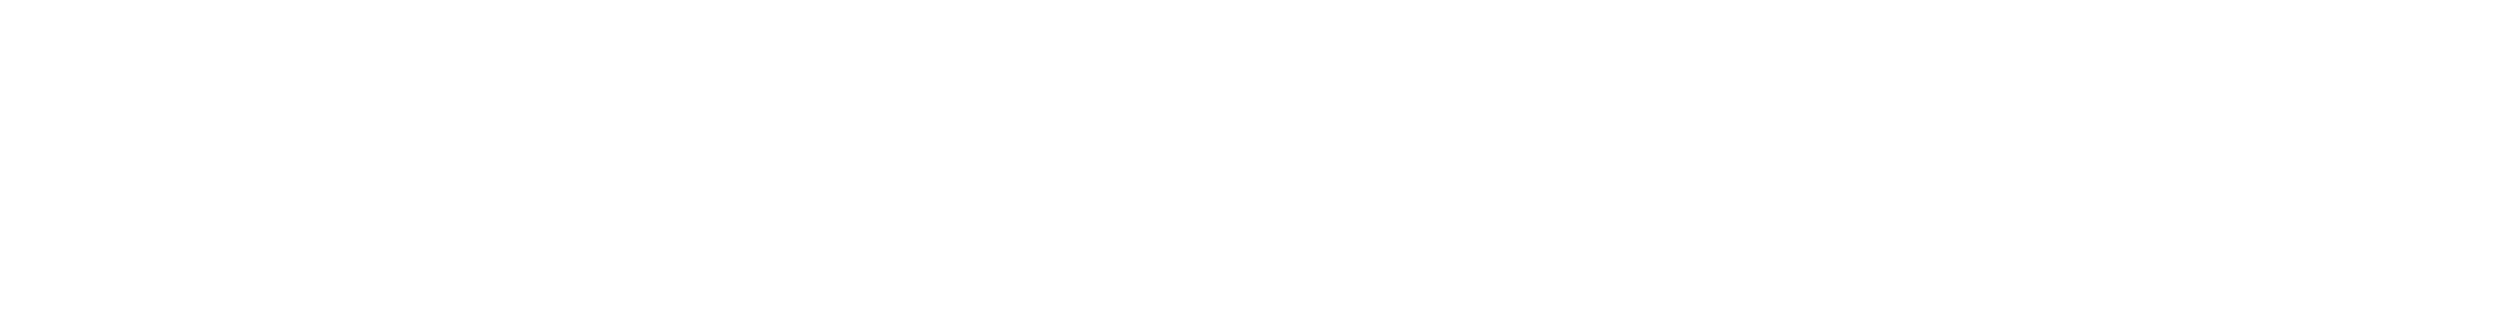 the-new-york-times-logo.png